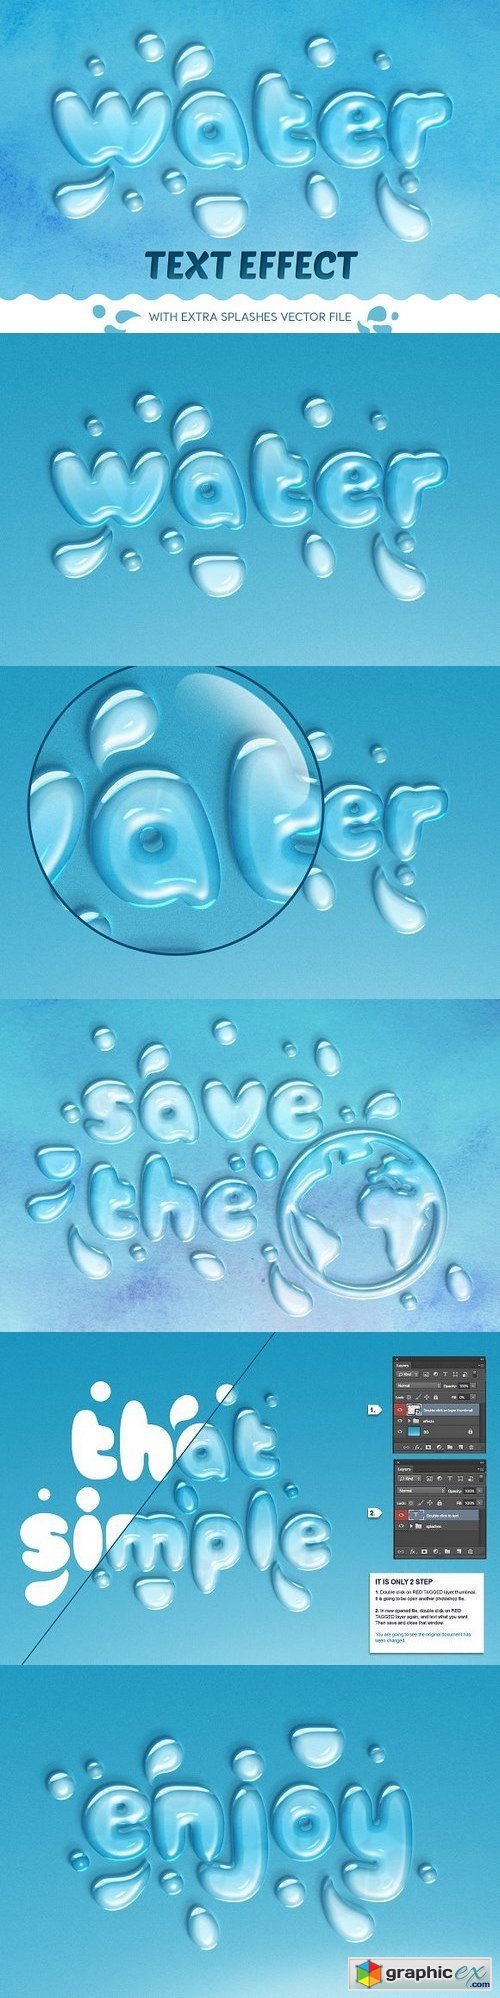 WATER TEXT EFFECT